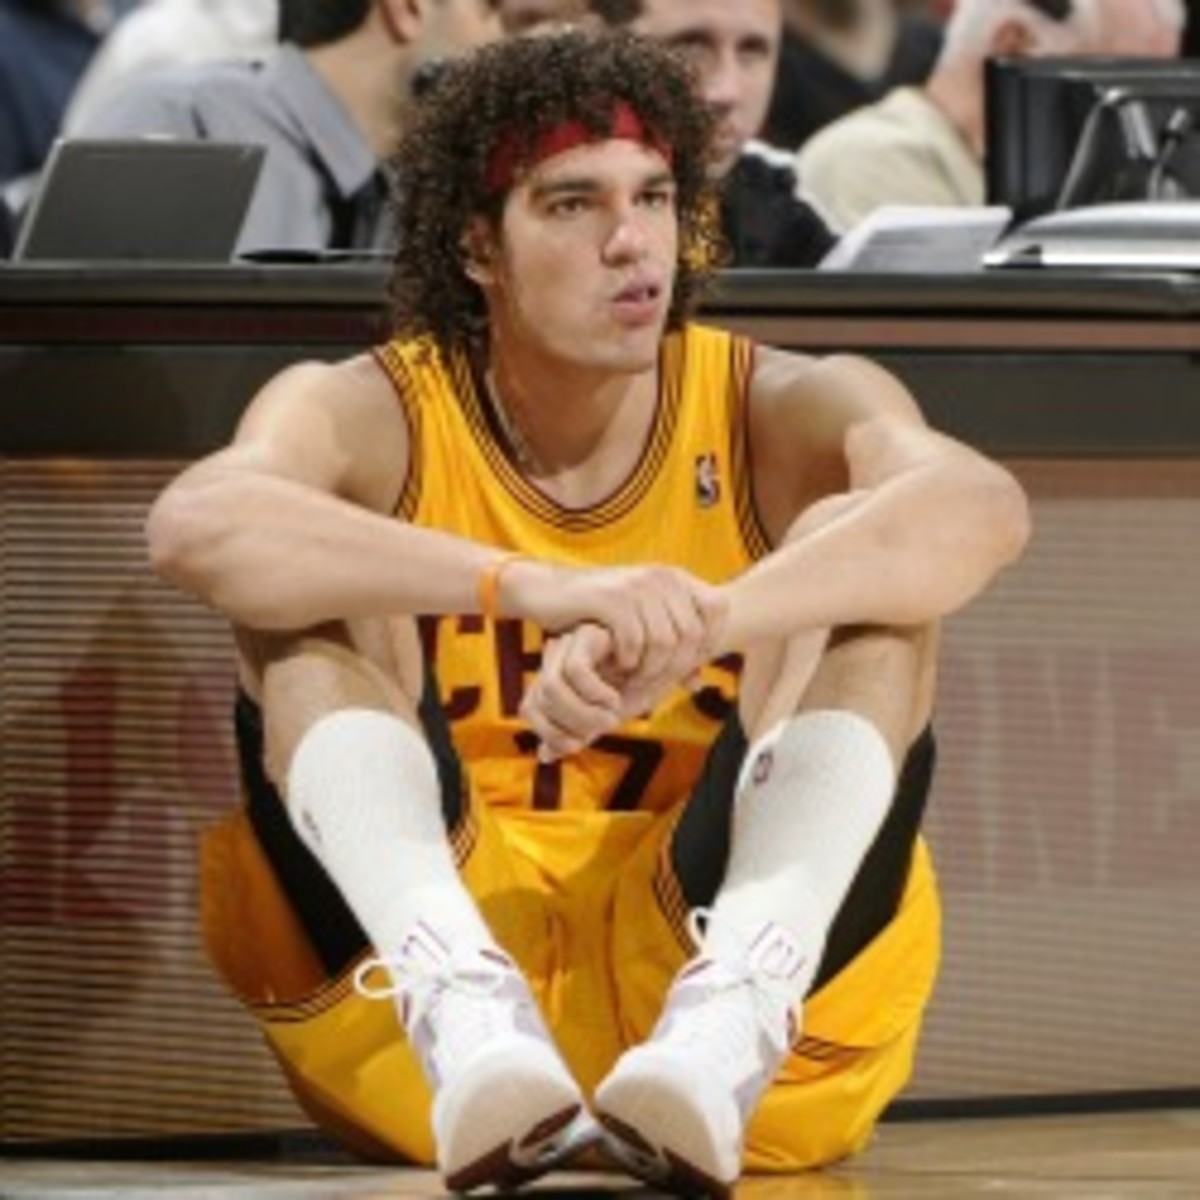 Anderson Varejao developed a blood clot in his lung that, because of blood thinners, will keep him out for the rest of the Cavs' season. (David Liam Kyle/Getty Images)